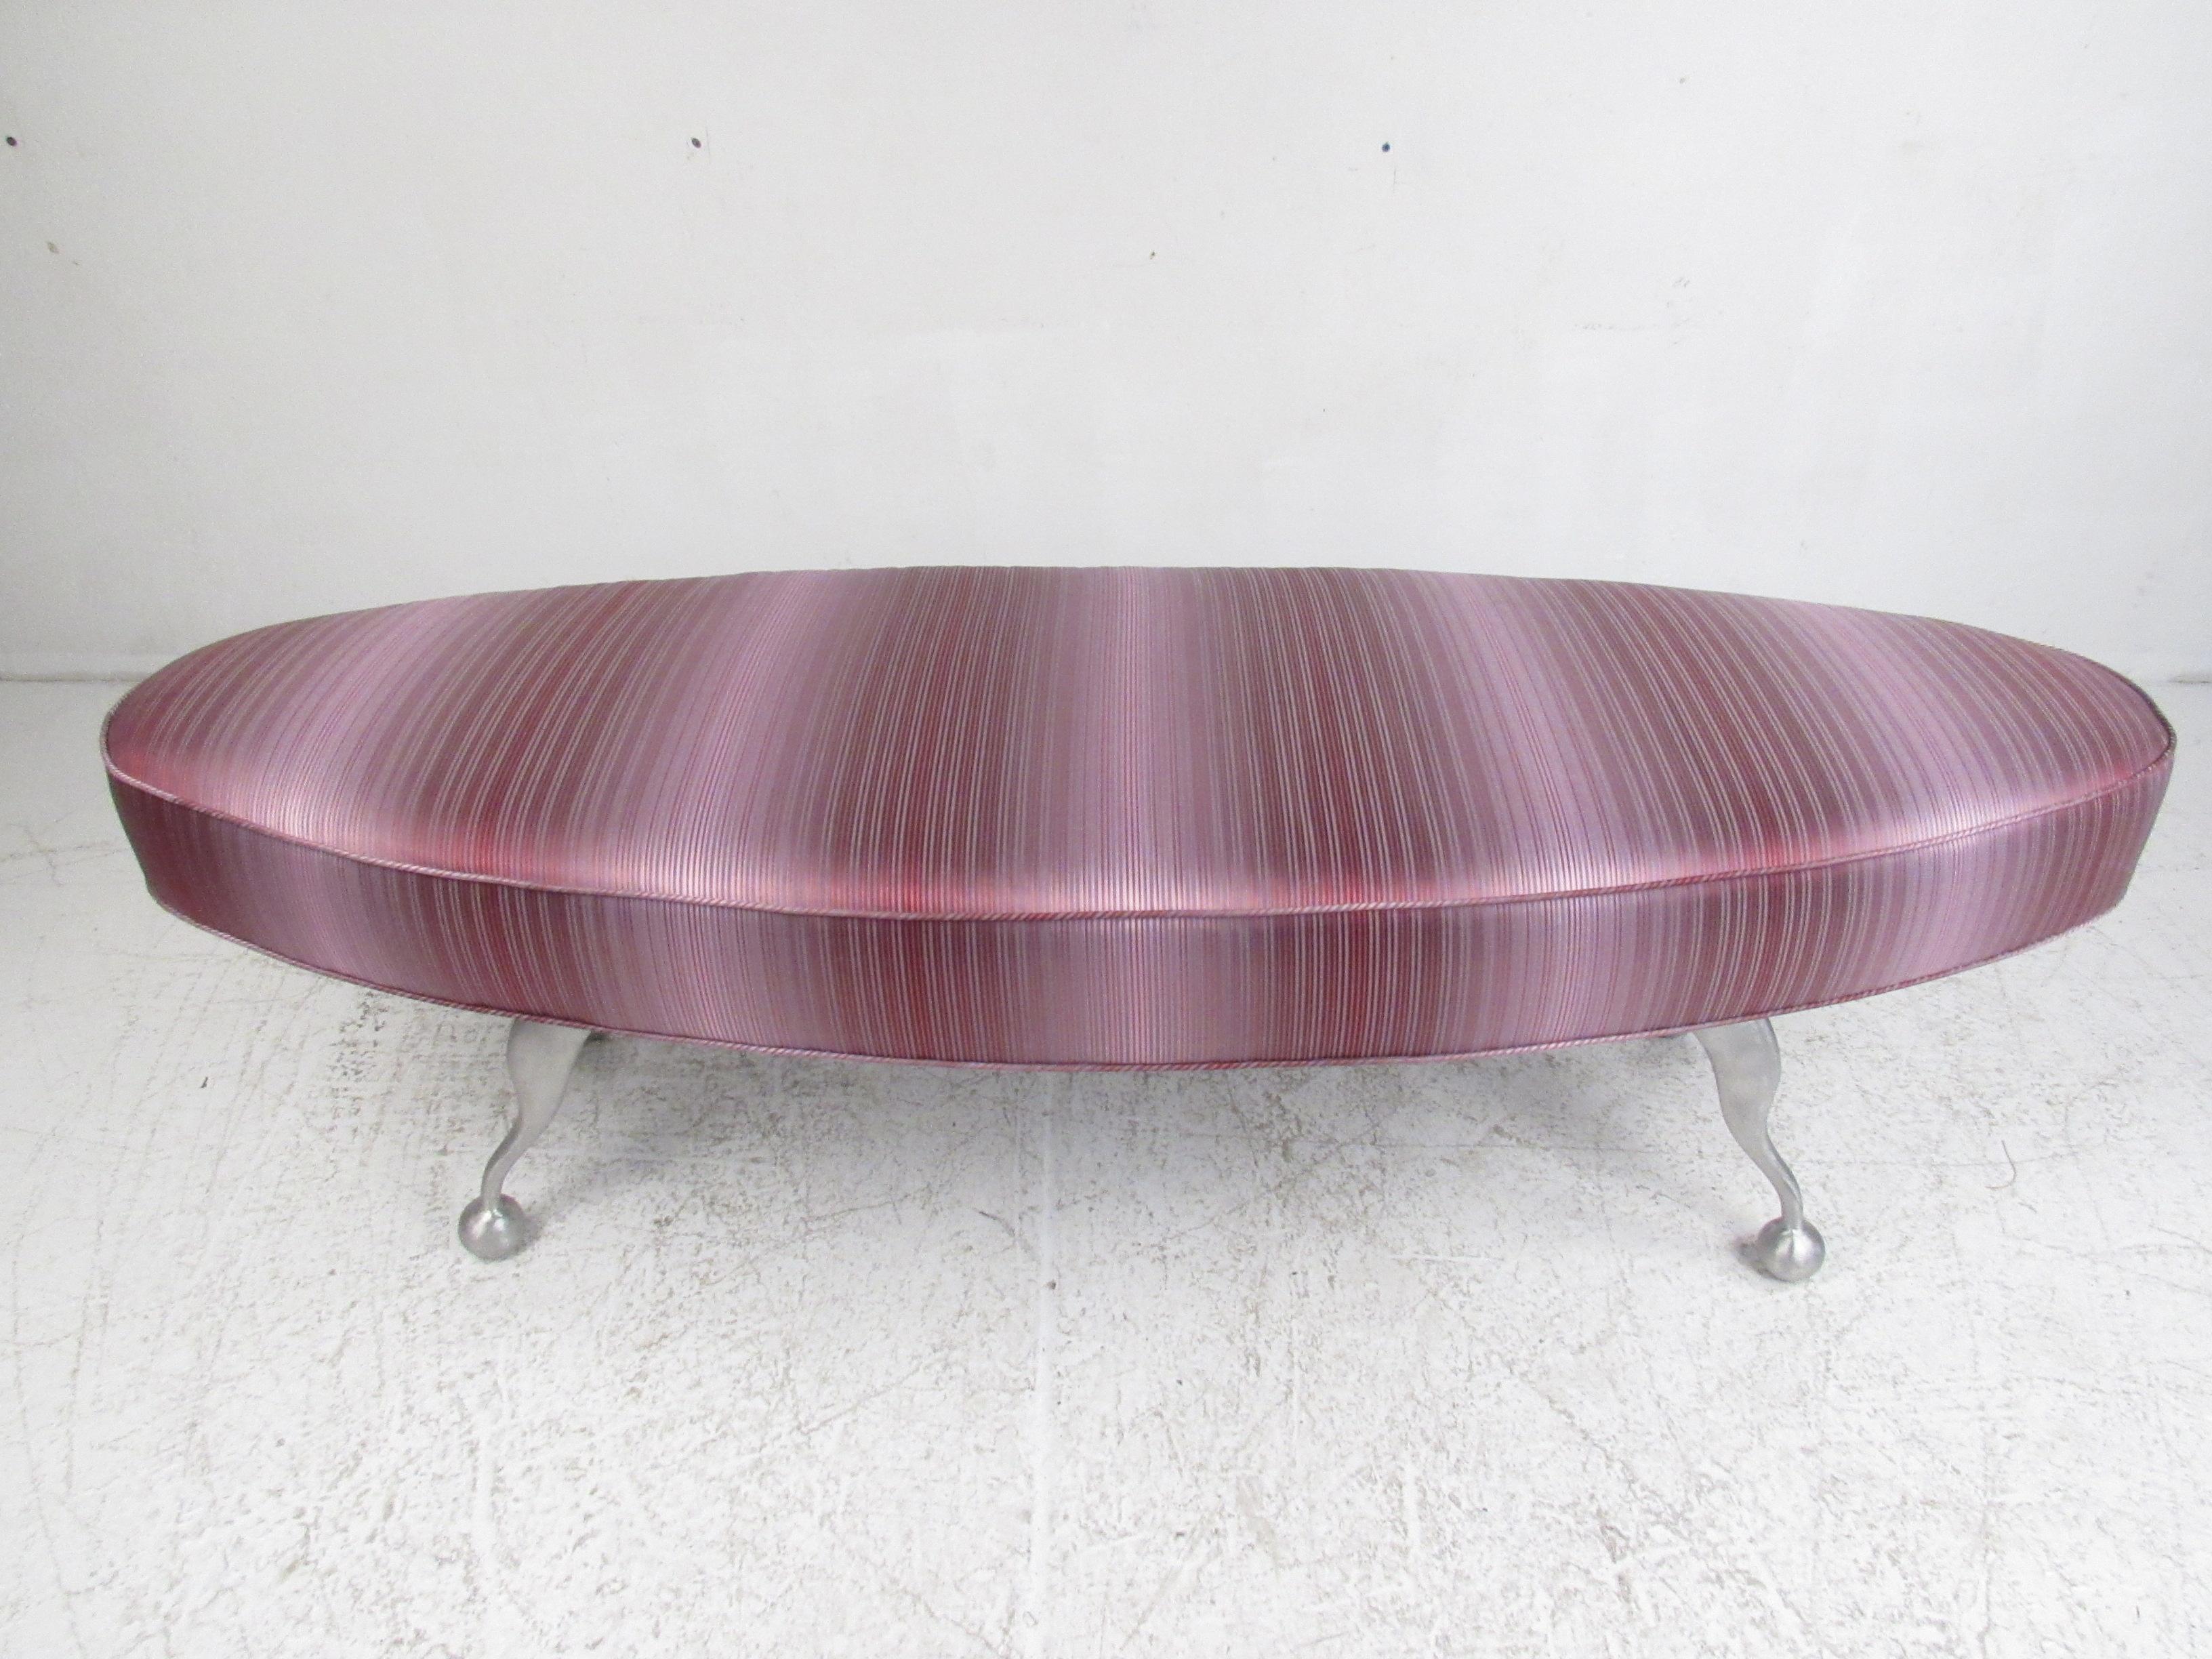 This stylish contemporary modern bench or foot stool features an elaborate striped upholstery and unusual sculpted metal legs. An overstuffed oval seat and wavy drumstick shaped legs make this beautiful bench stand out from the rest. This versatile